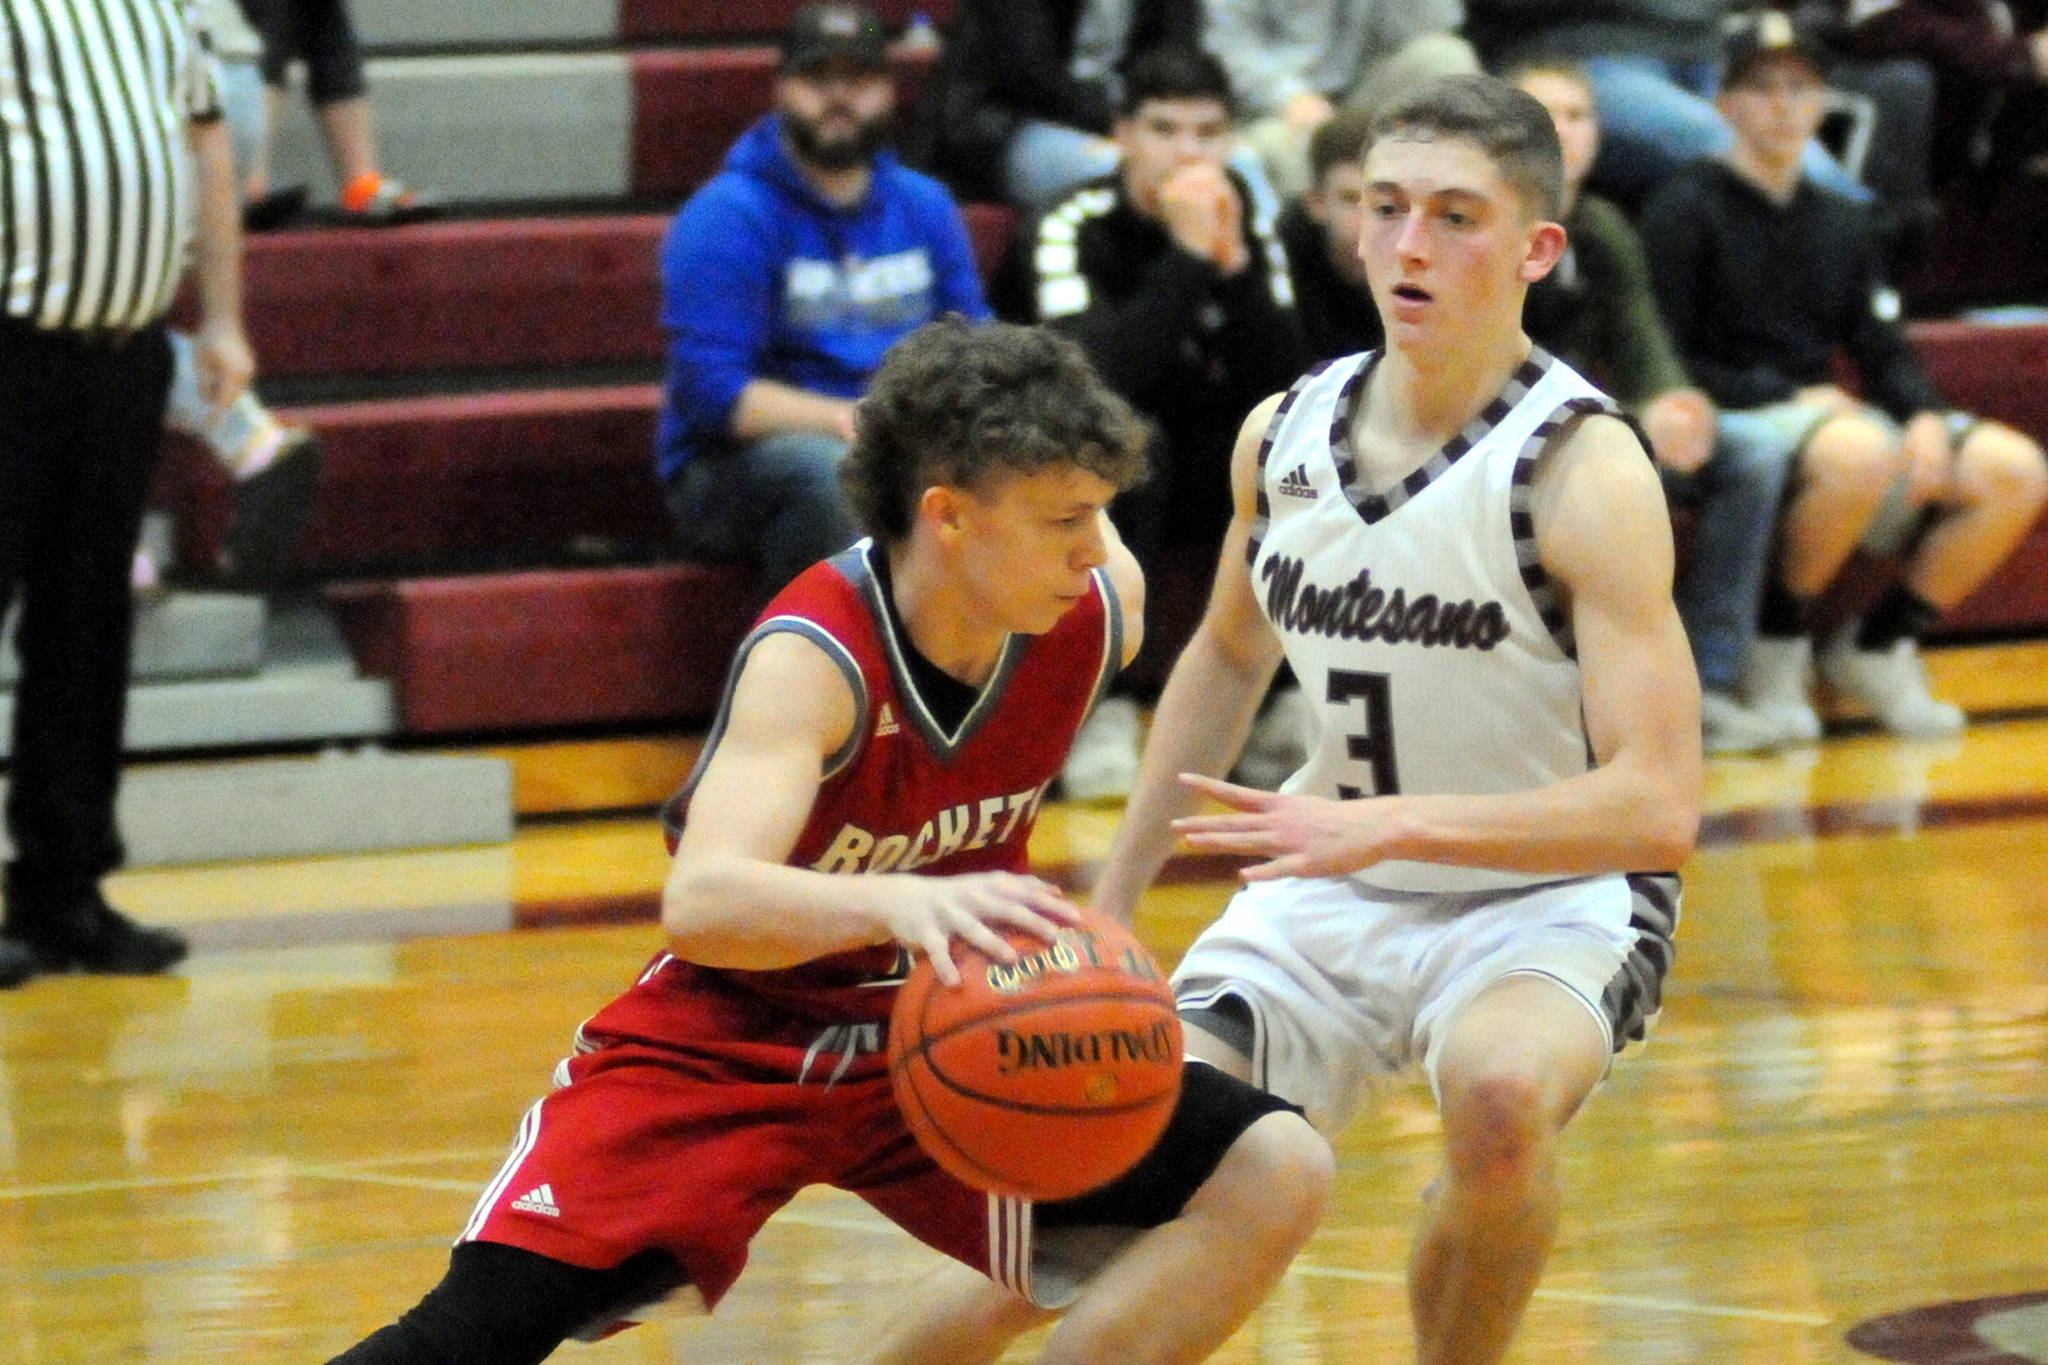 Saturday Roundup: Missed opportunities for Montesano in loss to Castle Rock